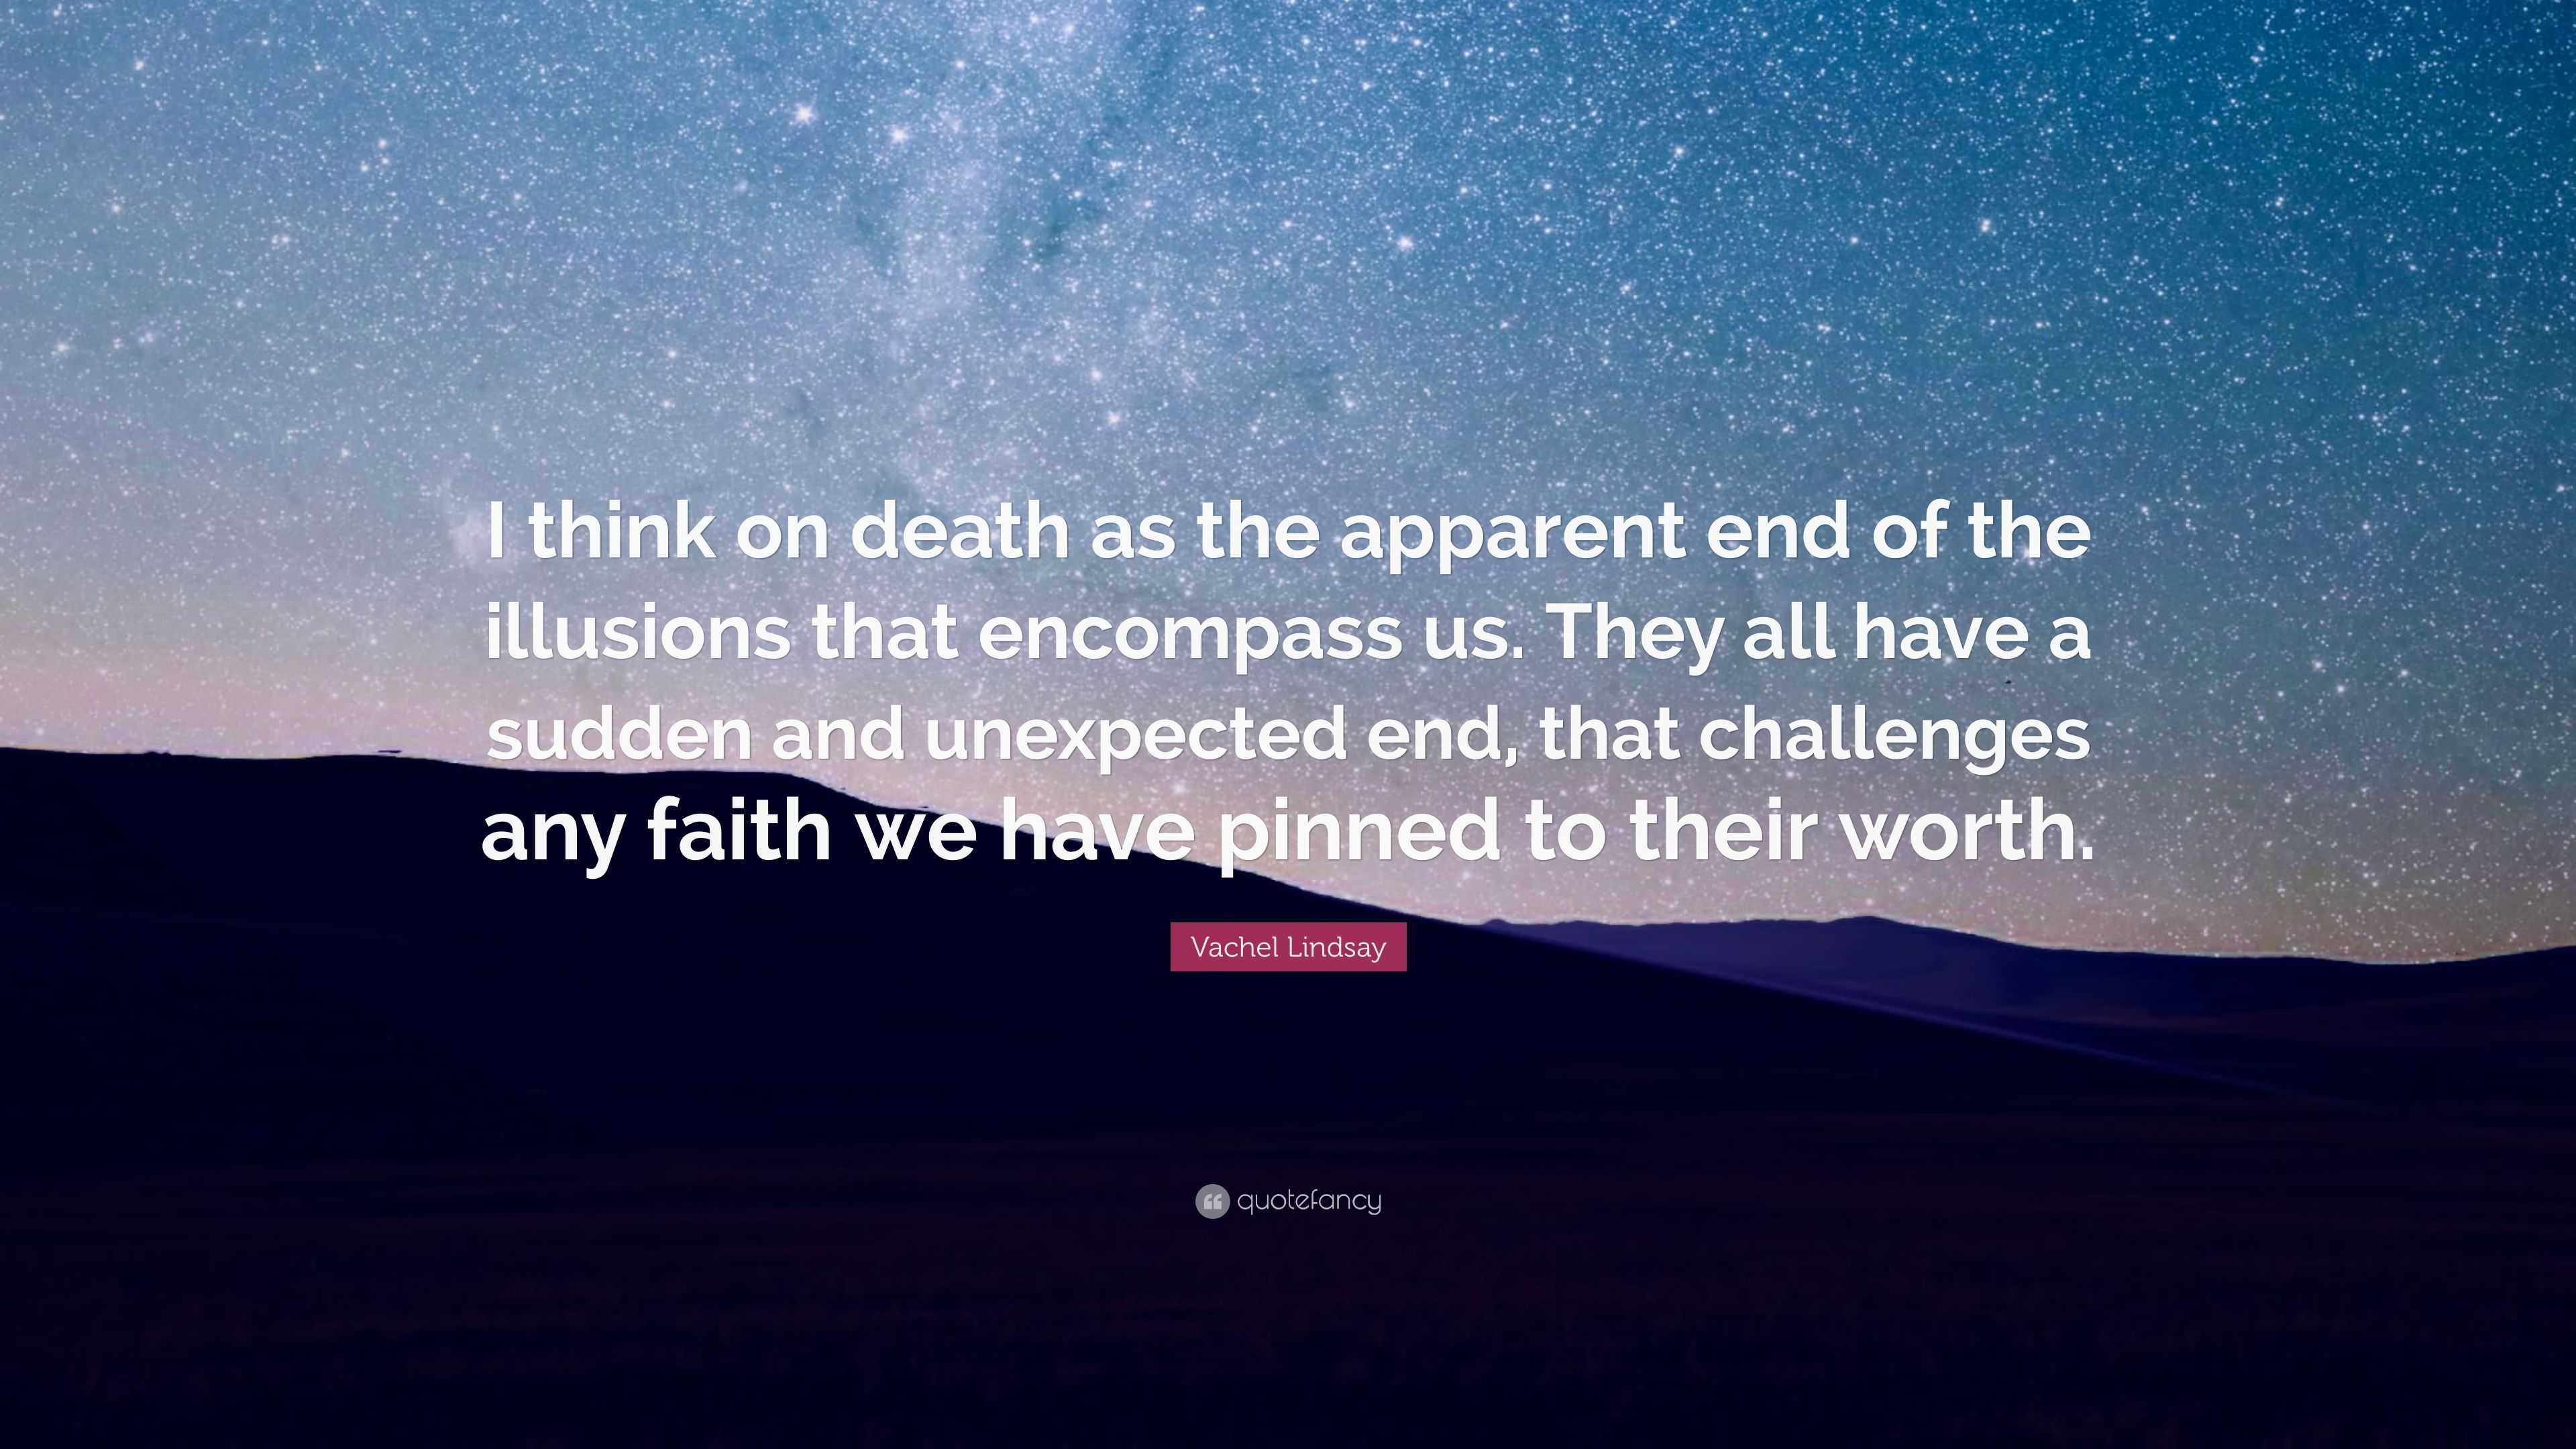 Vachel Lindsay Quote: “I think on death as the apparent end of the ...